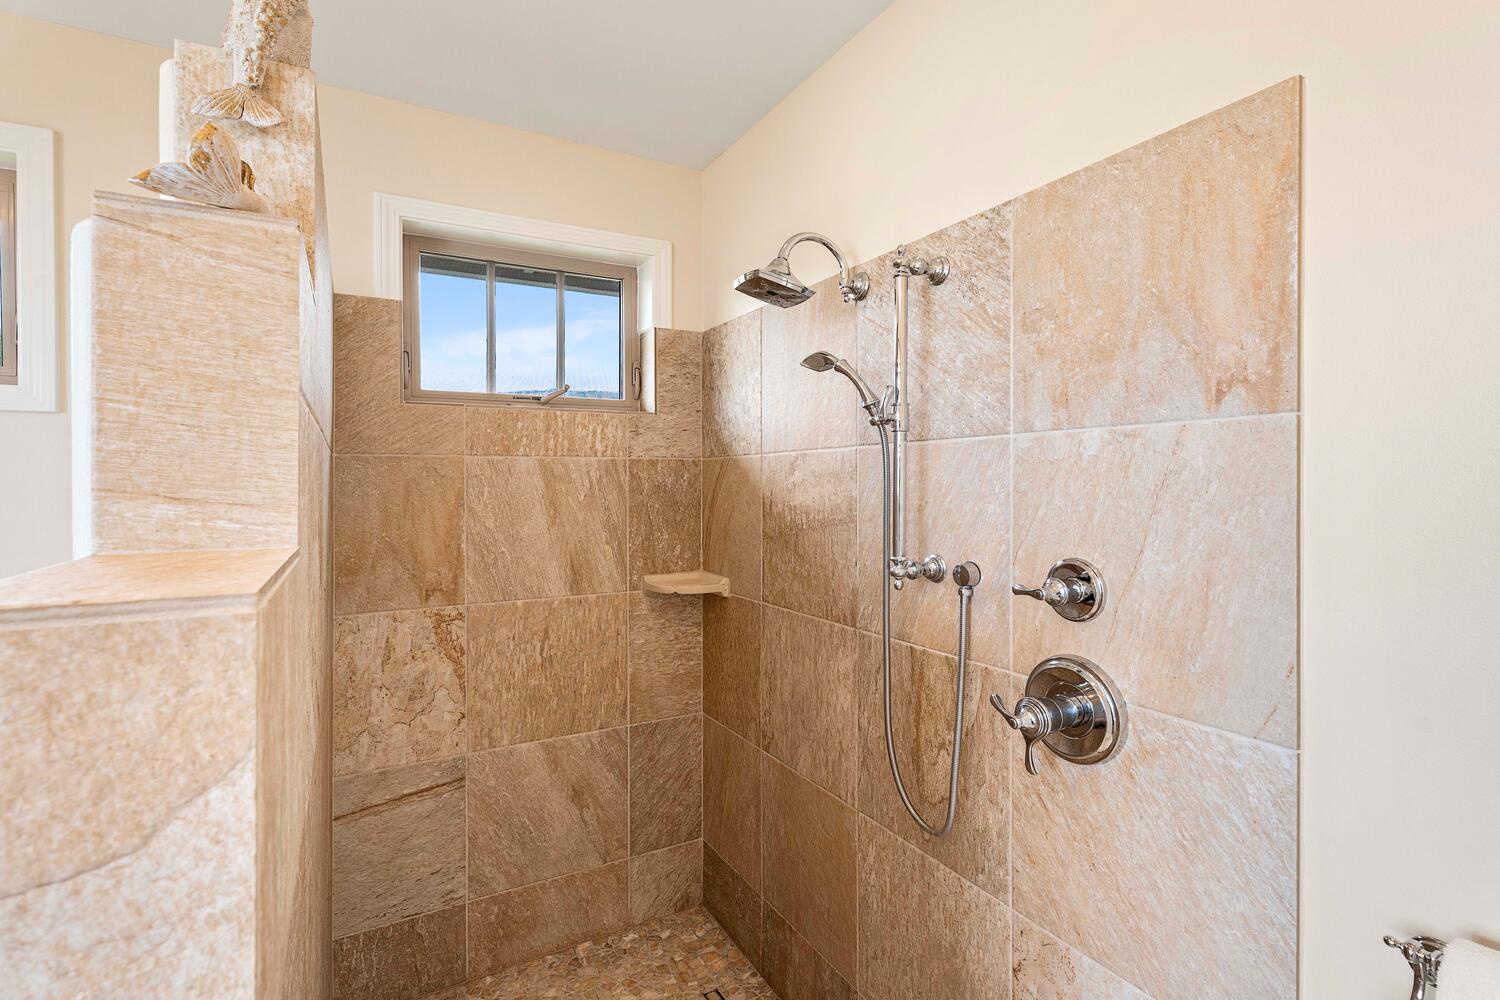 Kailua-Kona Vacation Rentals, Holua Kai #26 - The second bathroom has simplistic and functional tiled shower space with modern fixtures.